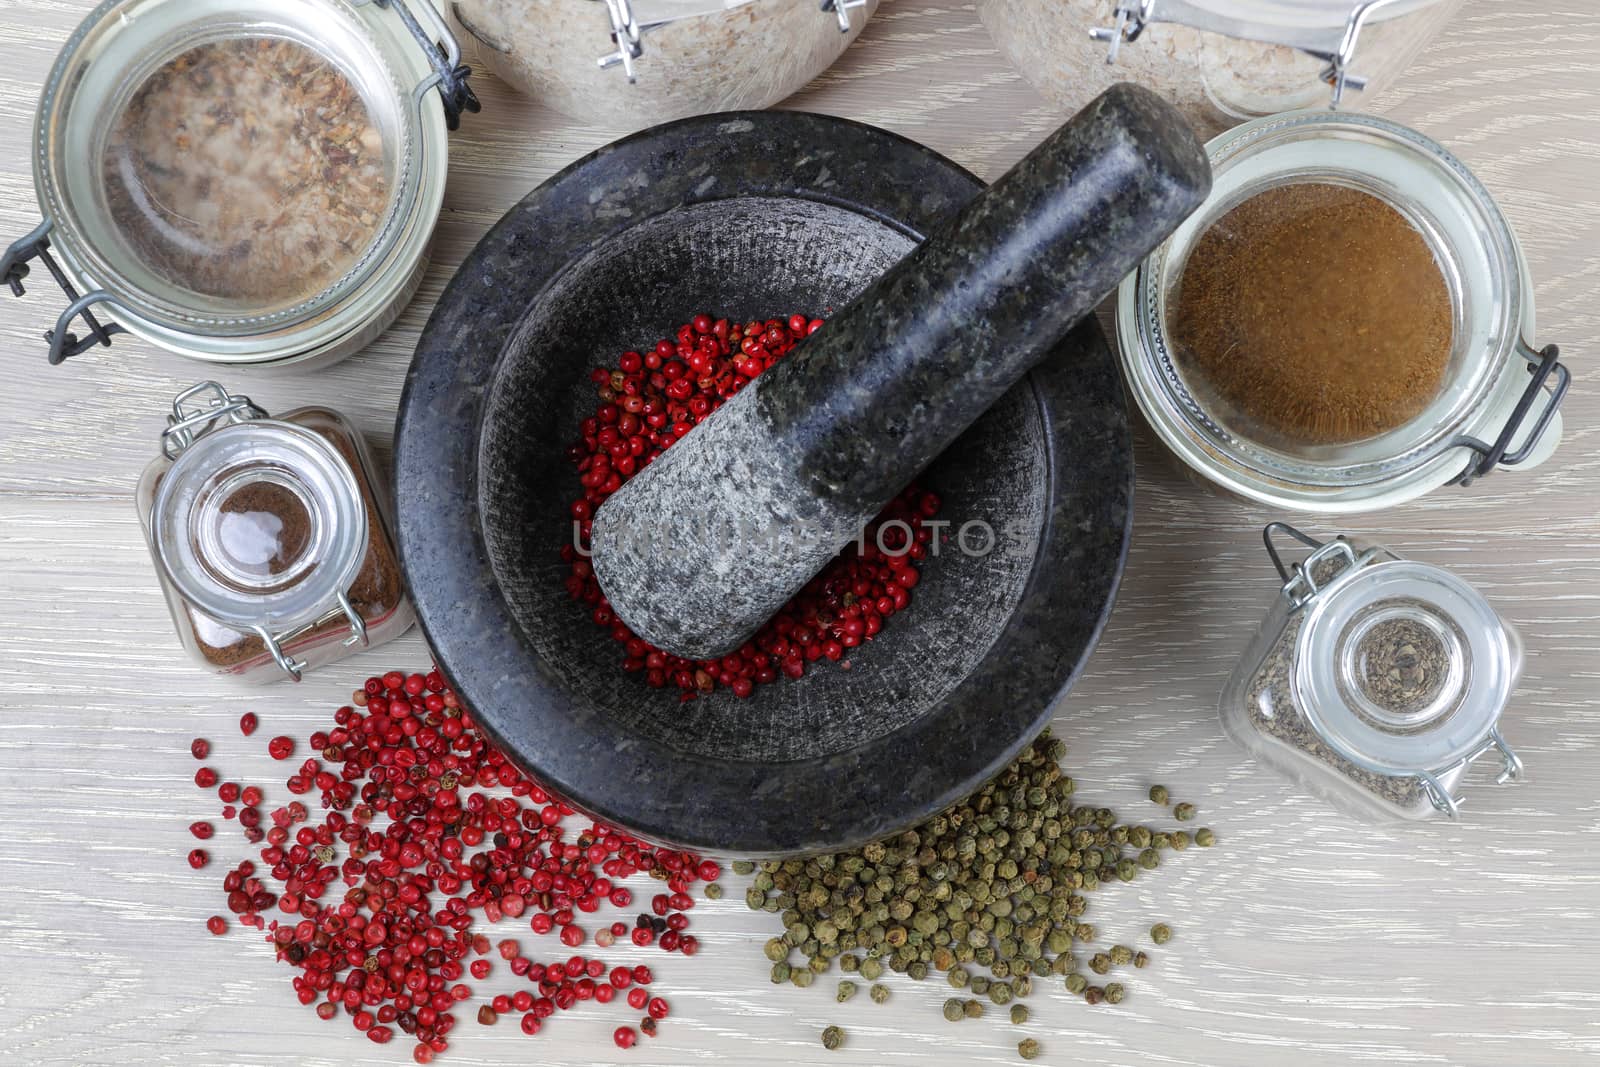 pepper corns and mortar and pestle grinder from top